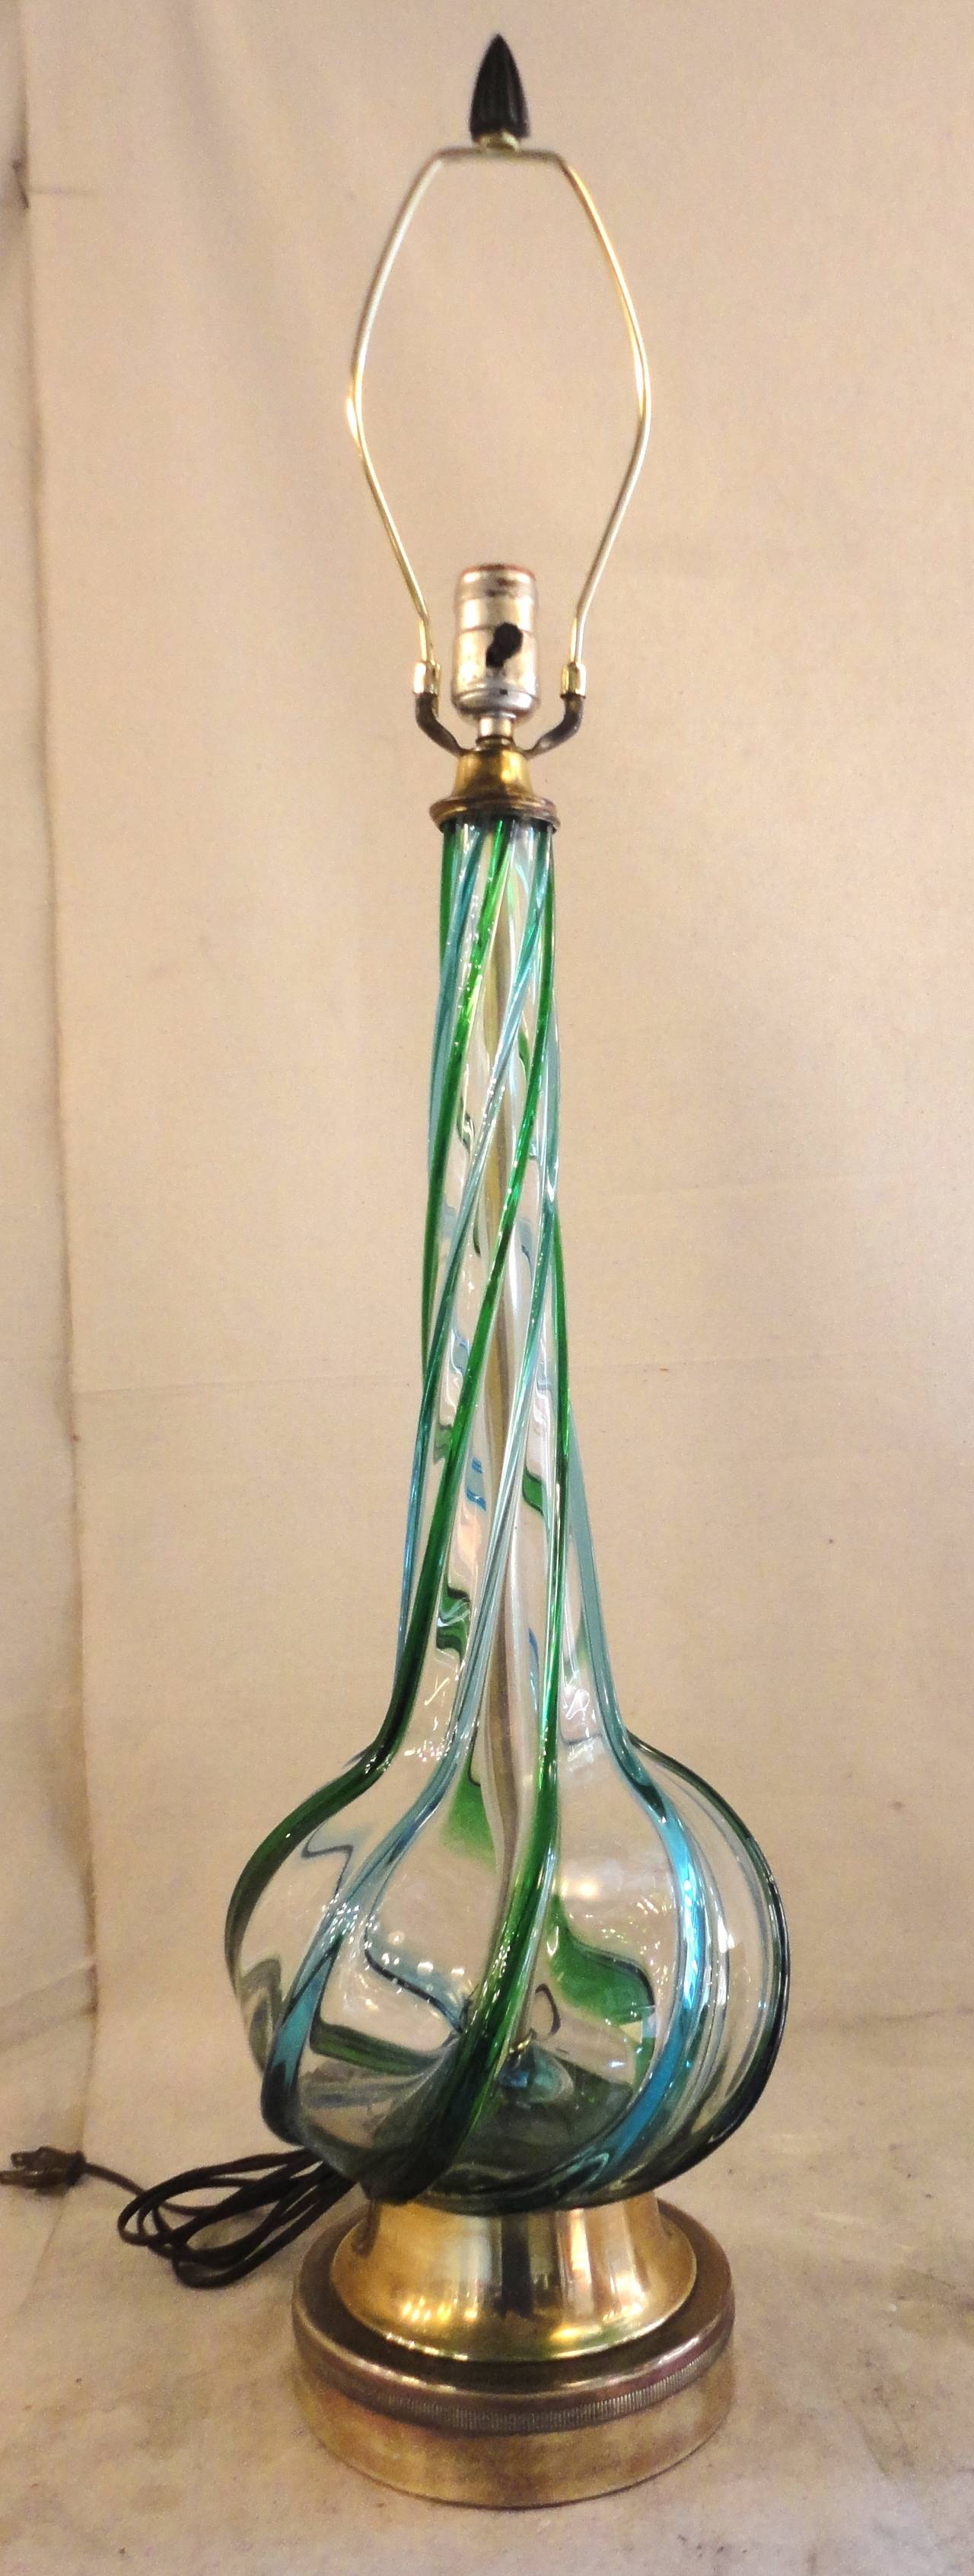 Beautiful Murano table lamp with hand blown twist style. Polished brass base with spiral blue and green coloring.
35